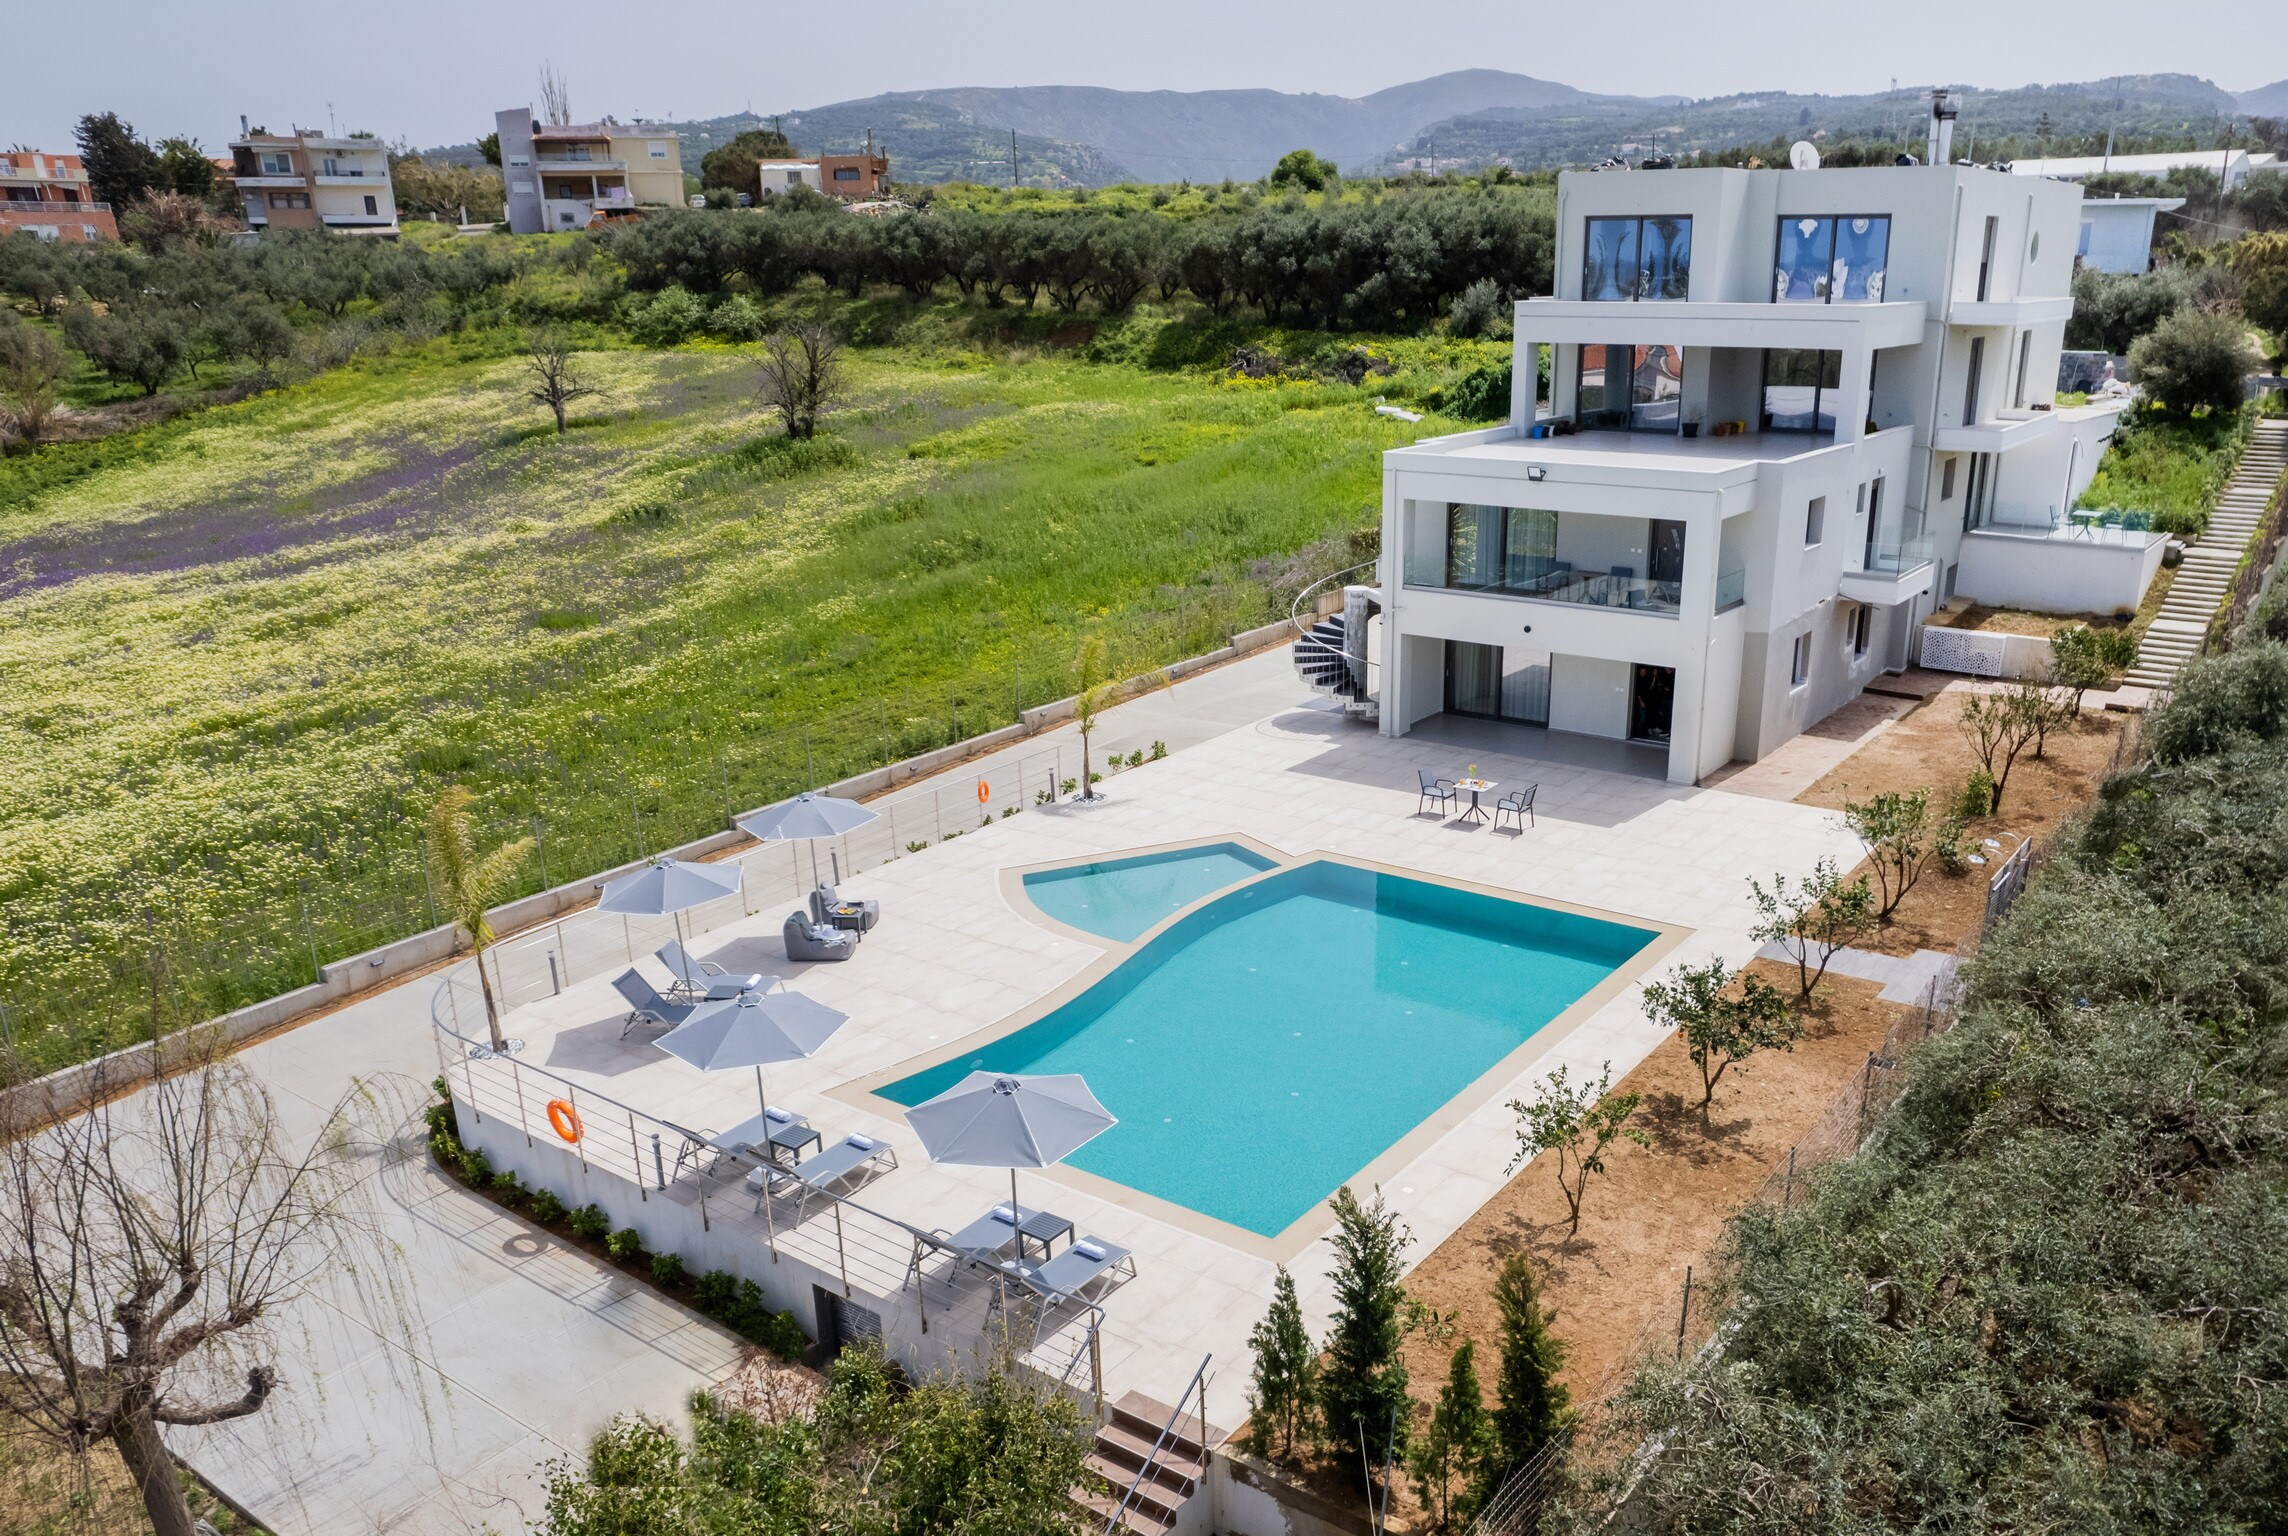 Exterior view & private Swimming pool of Modern 3 apts Villa,Huge Swimming pool,Near all amenities,Rethymno,Crete,Greece